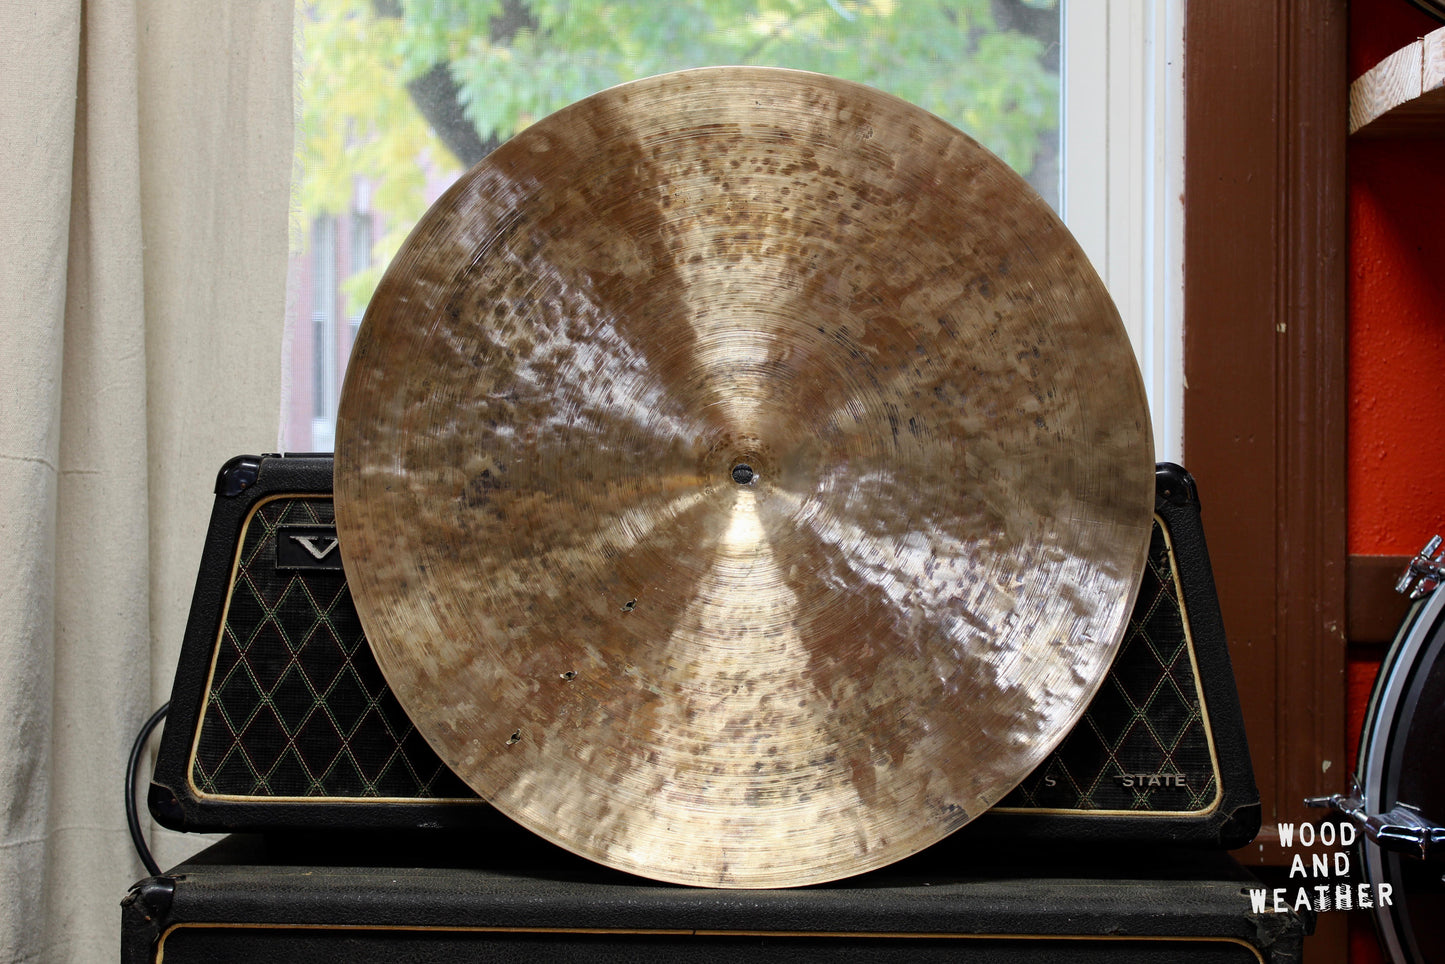 Quiqueg Cymbalsmith 19 5/16" Dirty Boppa Series Small Bell Ride Cymbal w/ Rivets 1982g